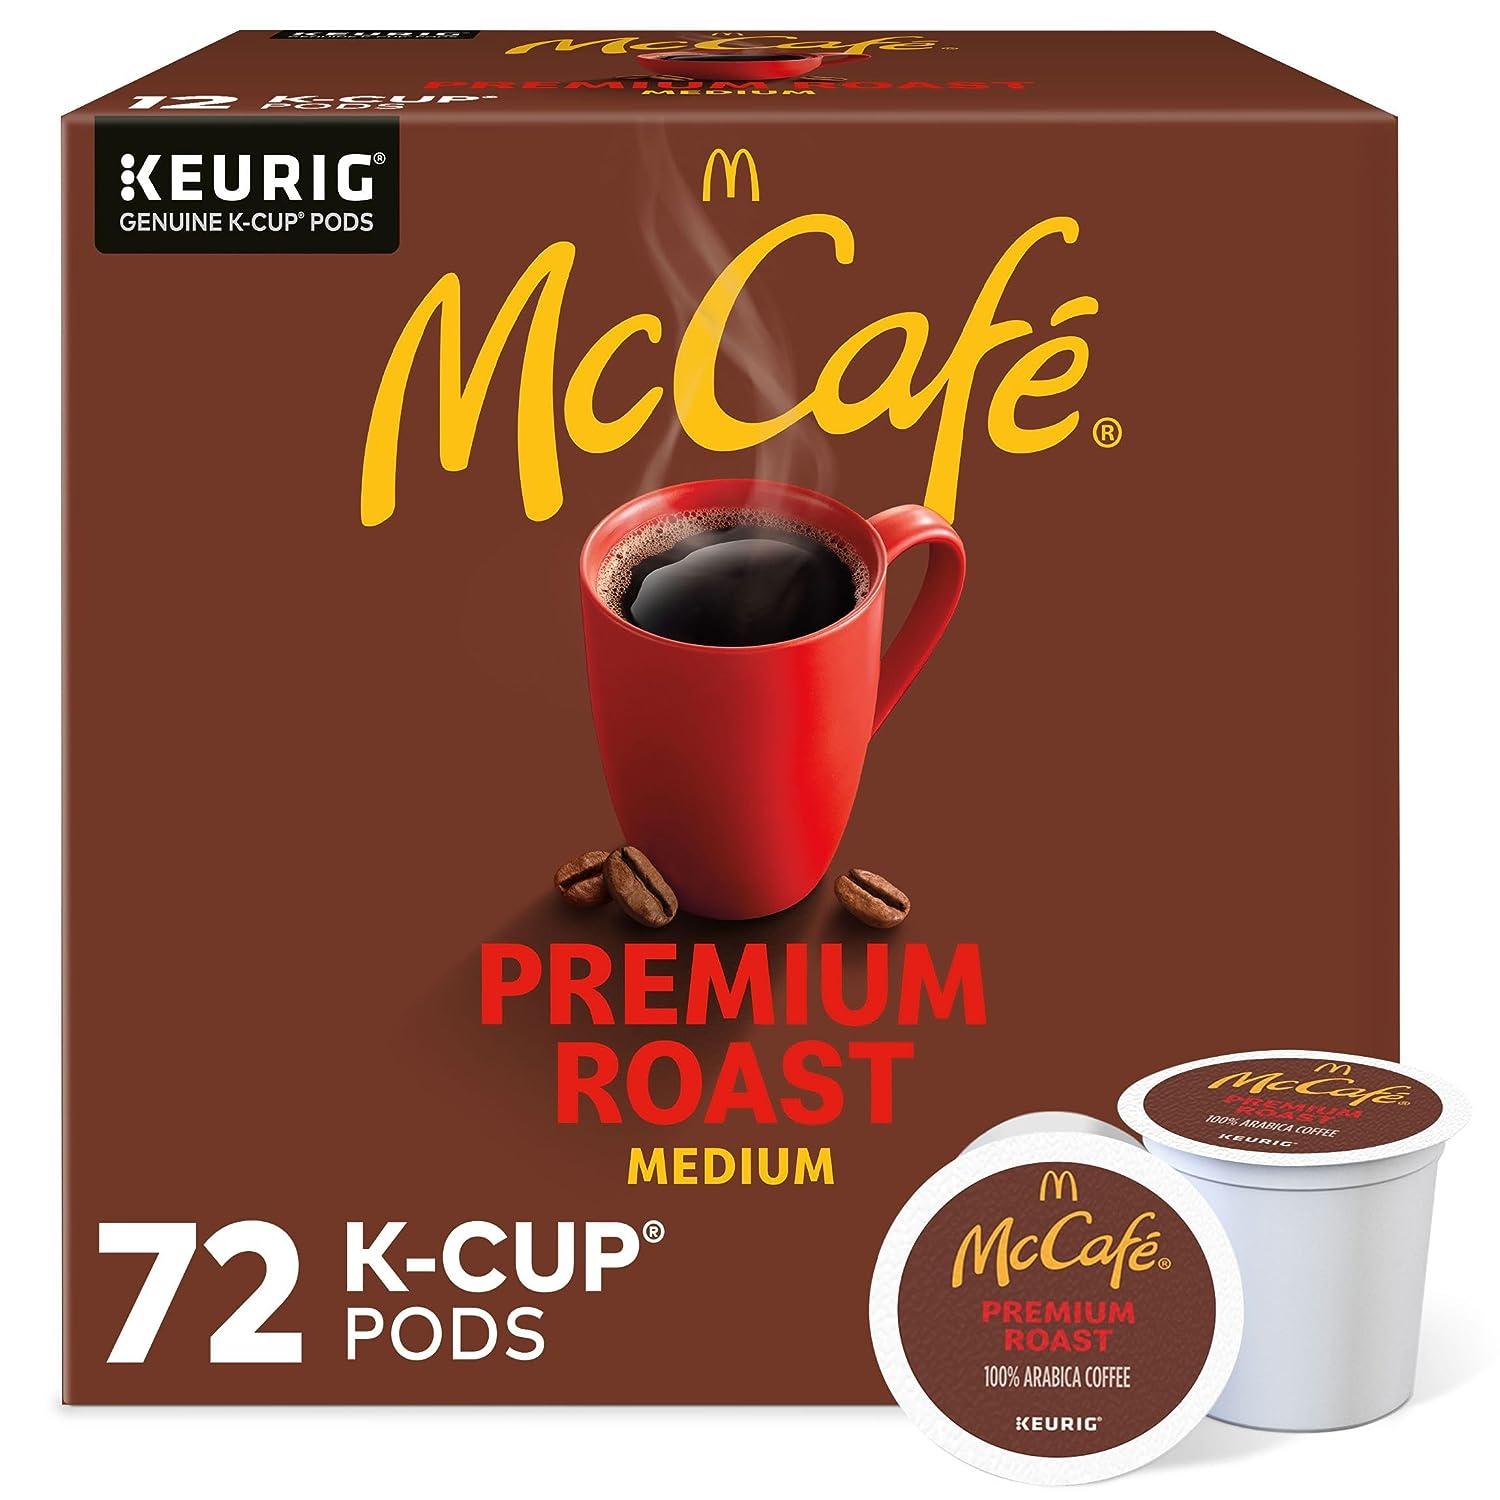 McCafe Premium Medium Roast K-Cup Coffee Pods 72 Pack for $24.36 Shipped